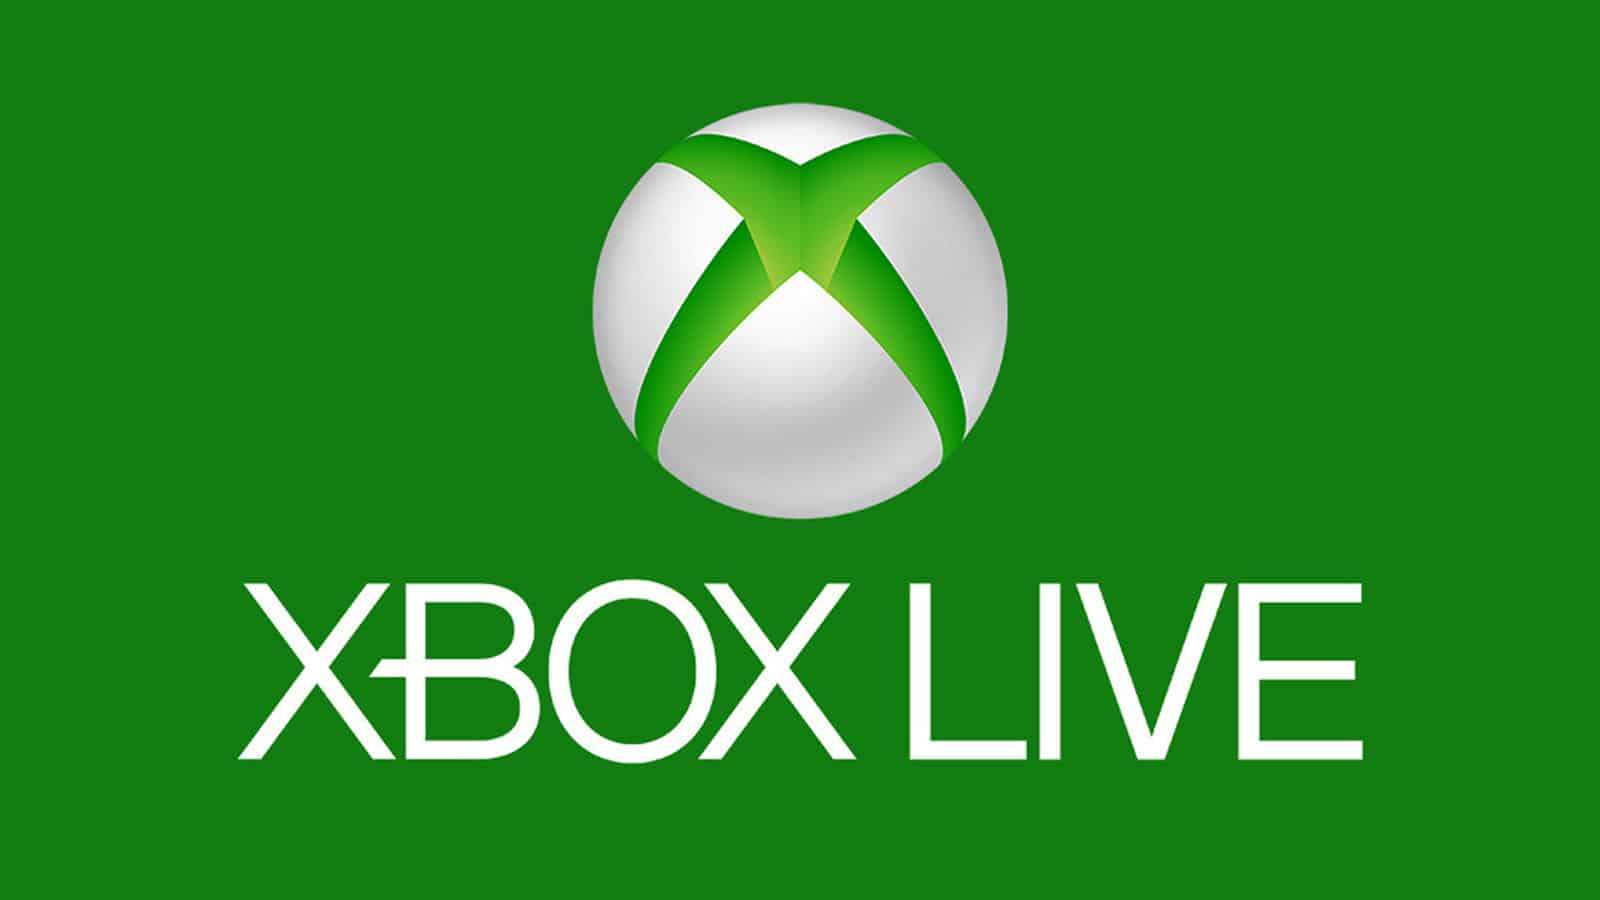 Xbox Live Server Status and Reported Problems